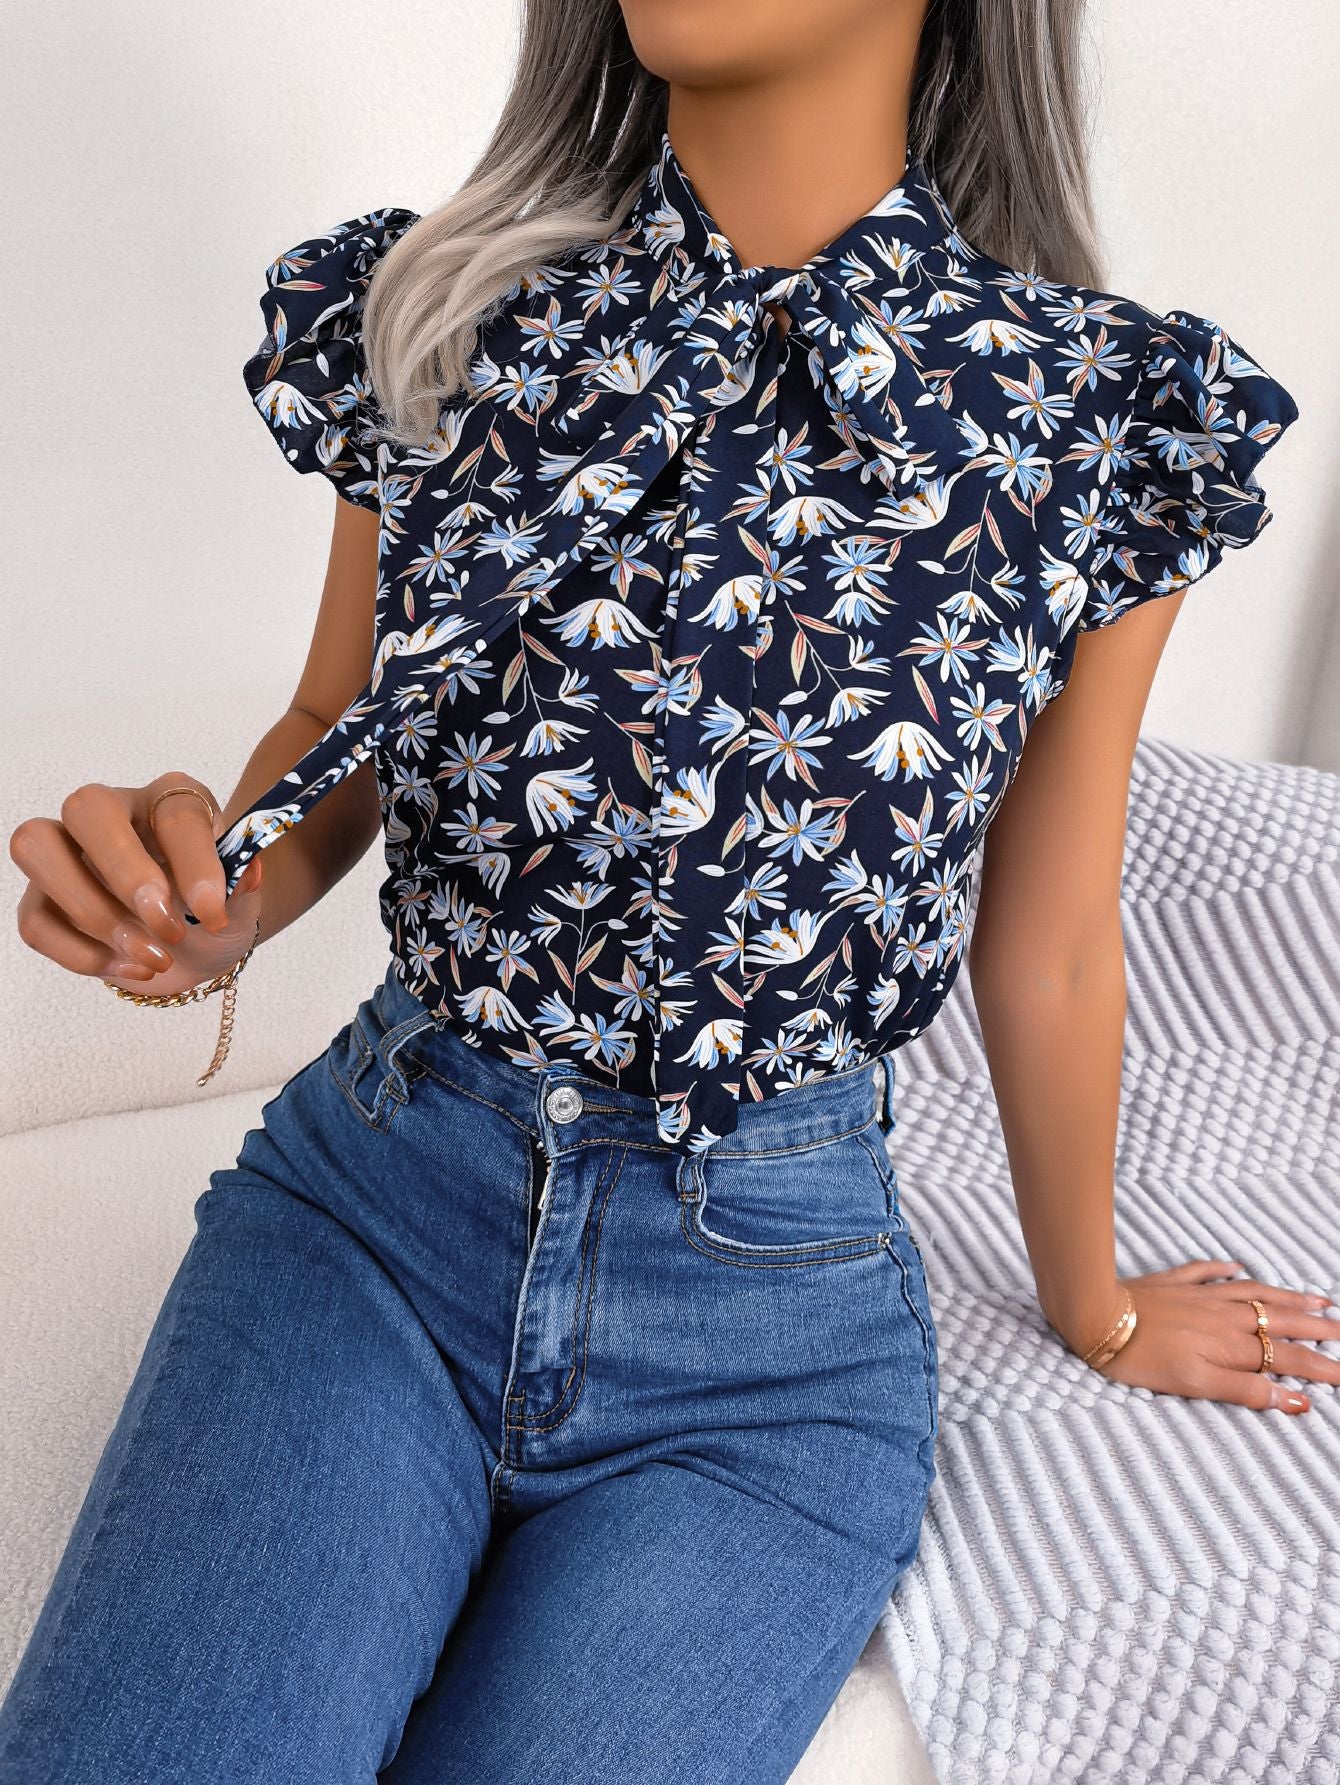 Floral Tie Neck Flutter Sleeve Blouse free shipping -Oh Em Gee Boutique